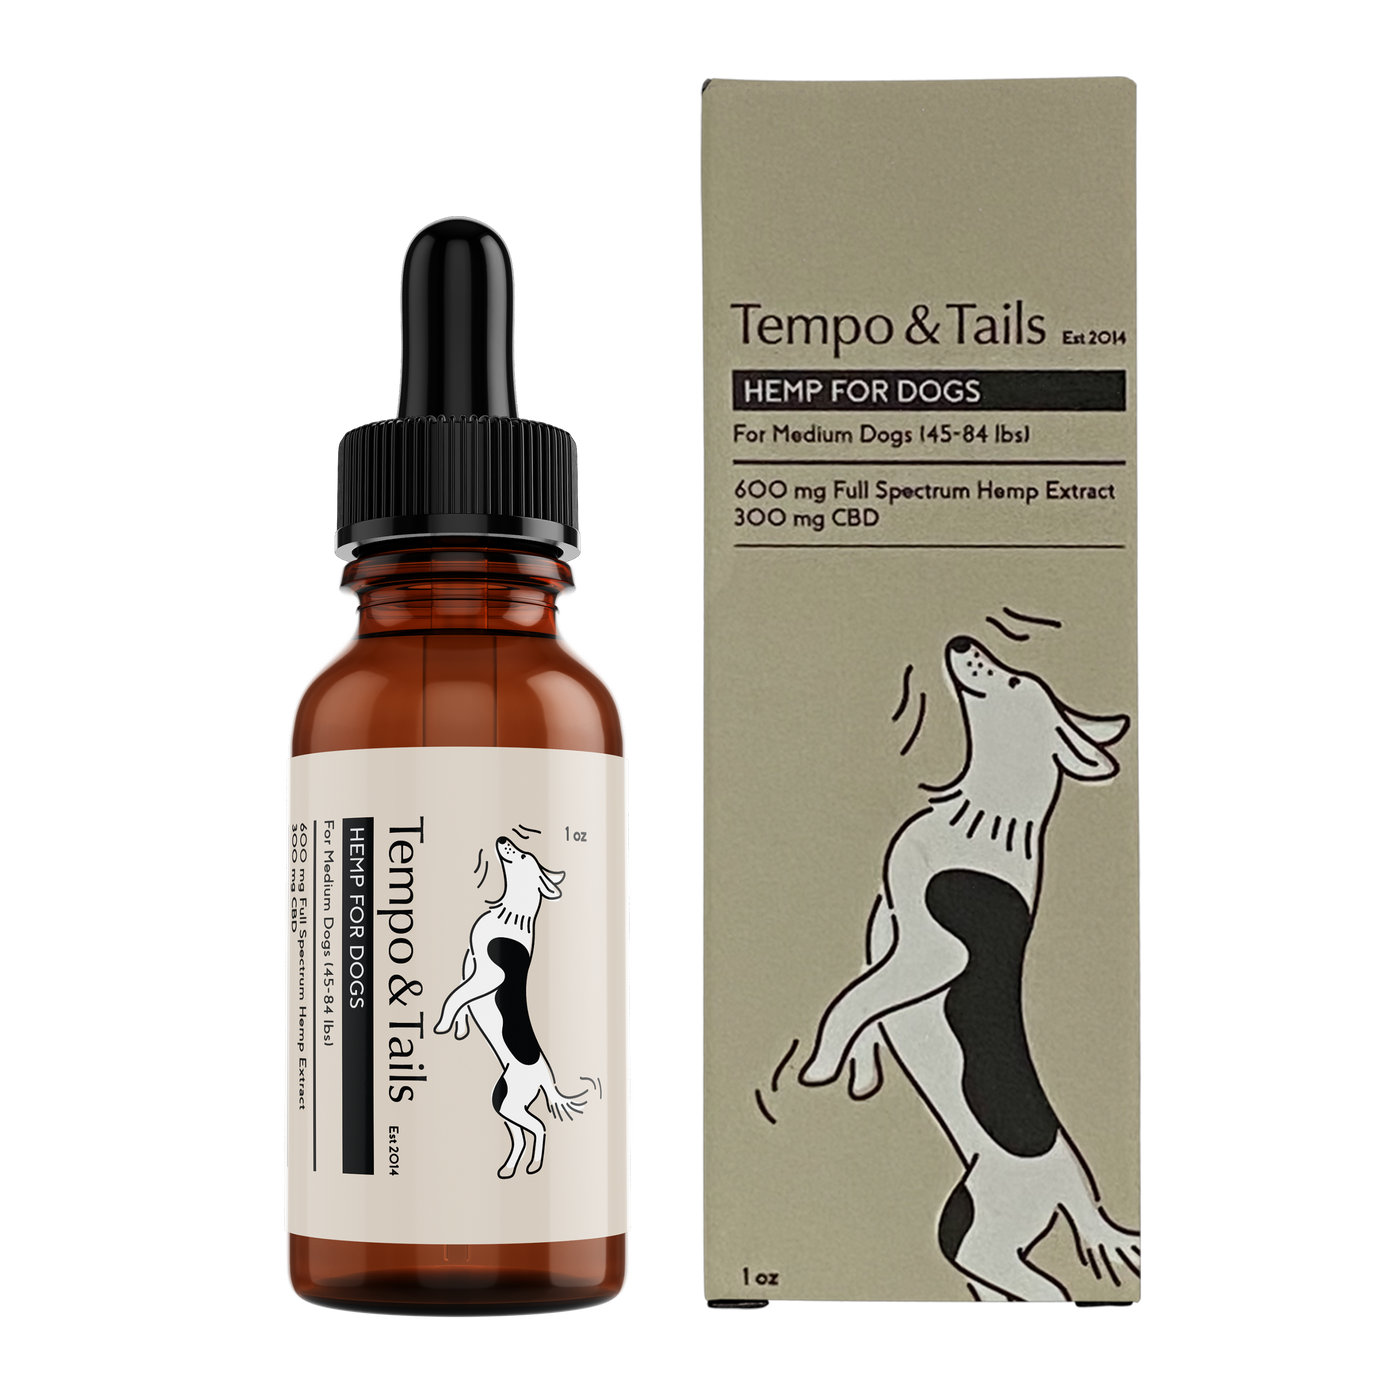 Natural Oil for Medium Dogs (45-84 Lbs.)